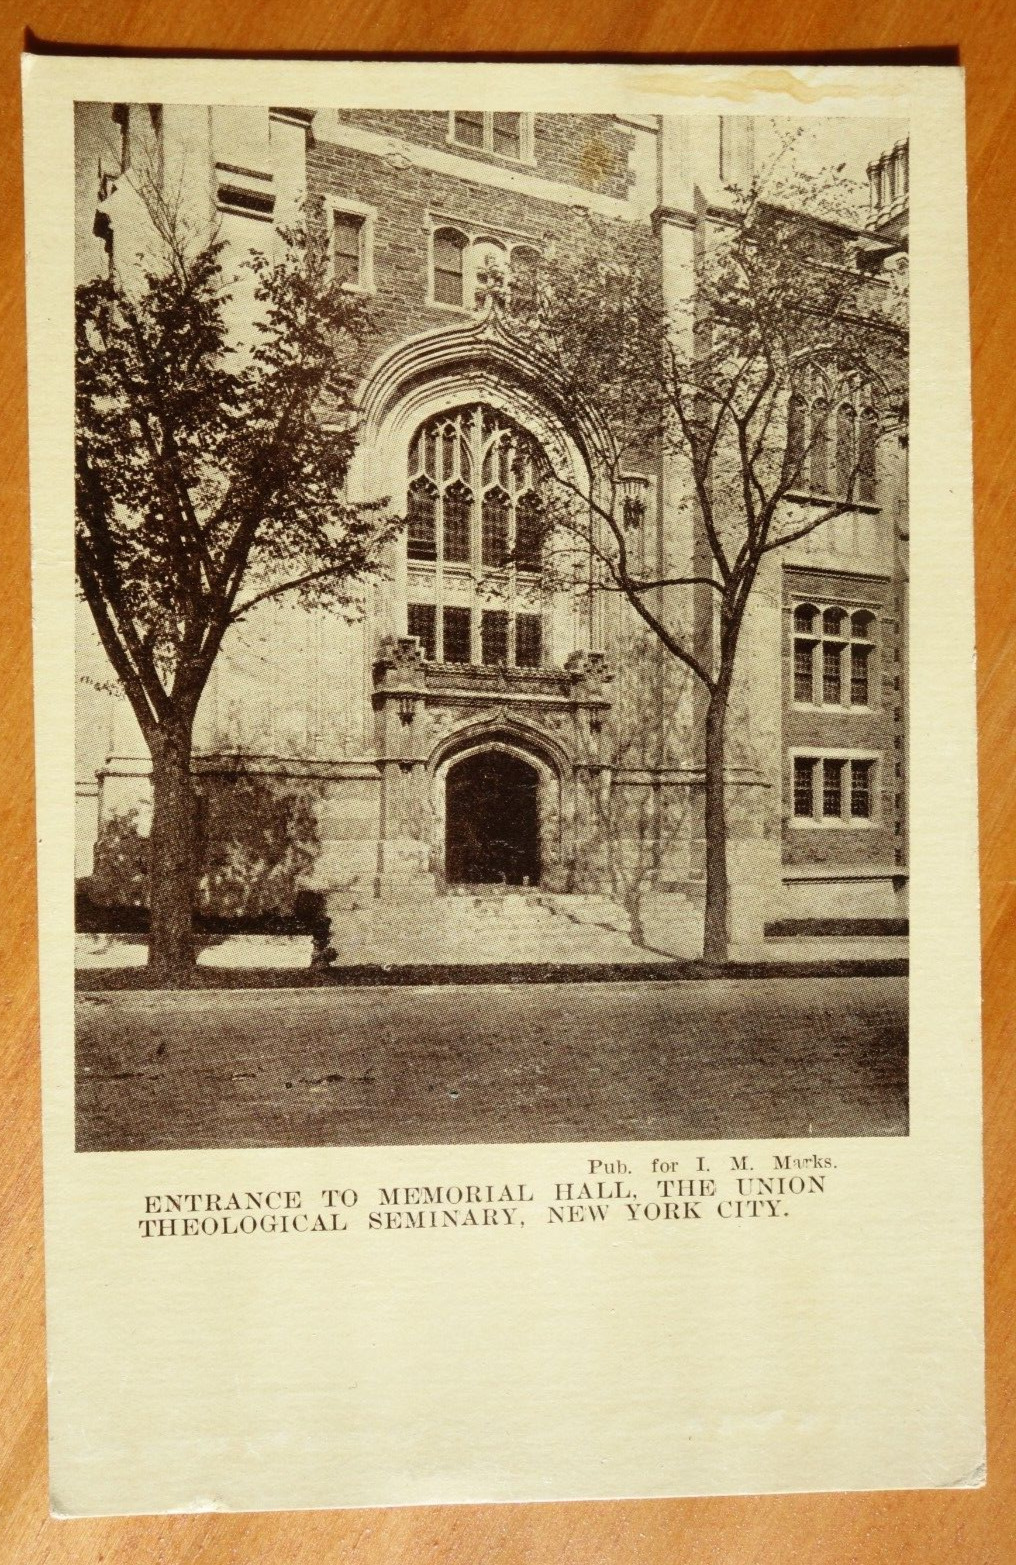 entrance to Memorial Hall, Union Theological Seminary, NYC Morningside Heights